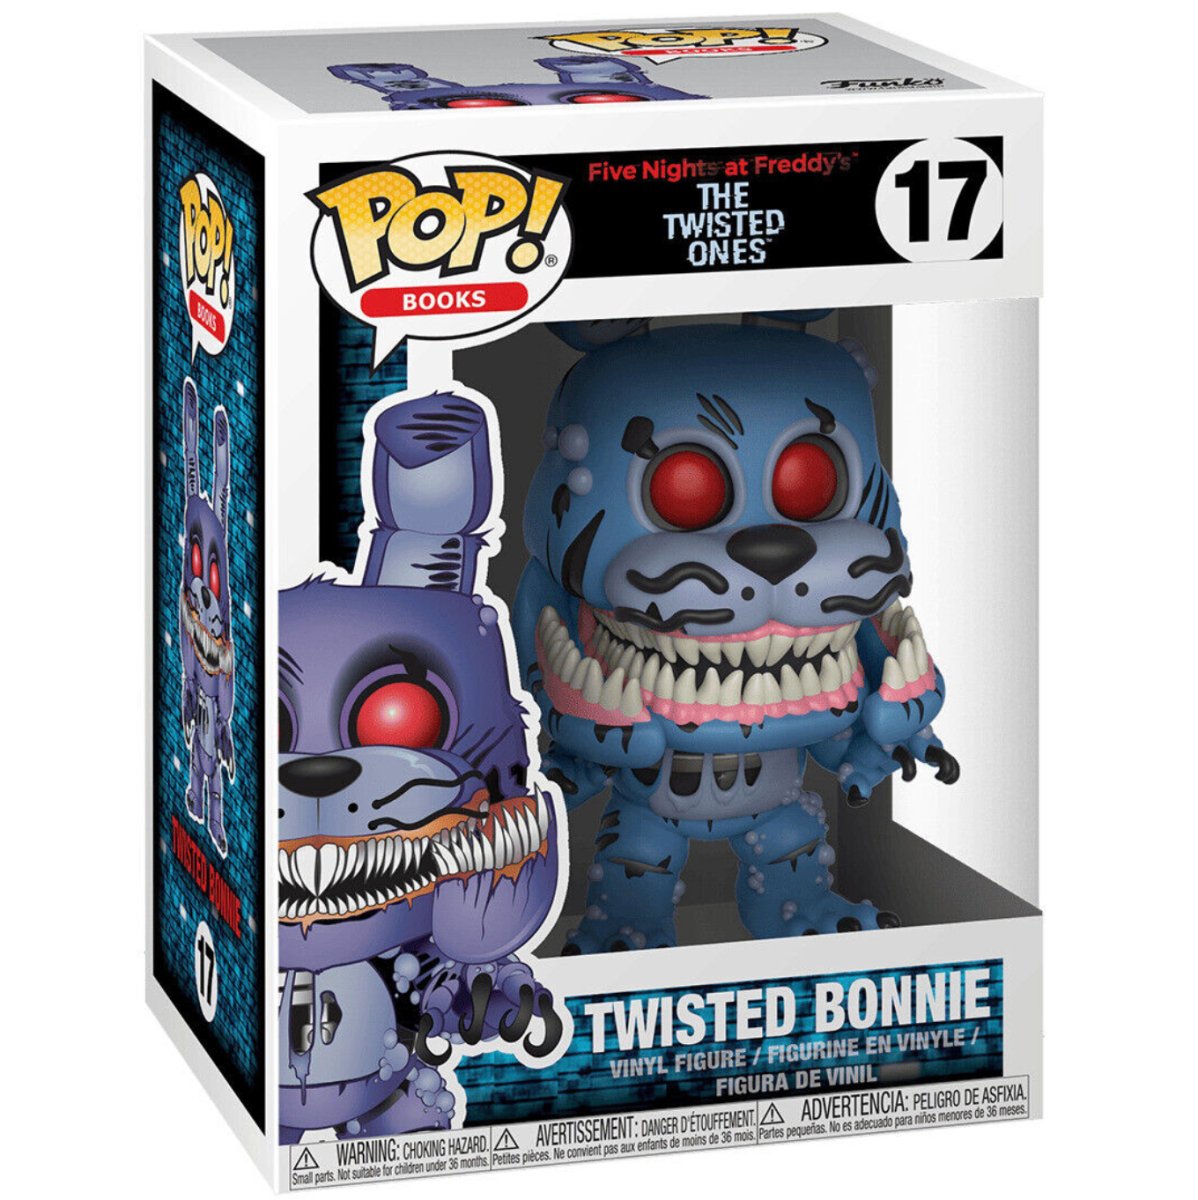 Five Nights at Freddy's The Twisted Ones - Twisted Bonnie #17 - Funko Pop! Vinyl Games - Persona Toys